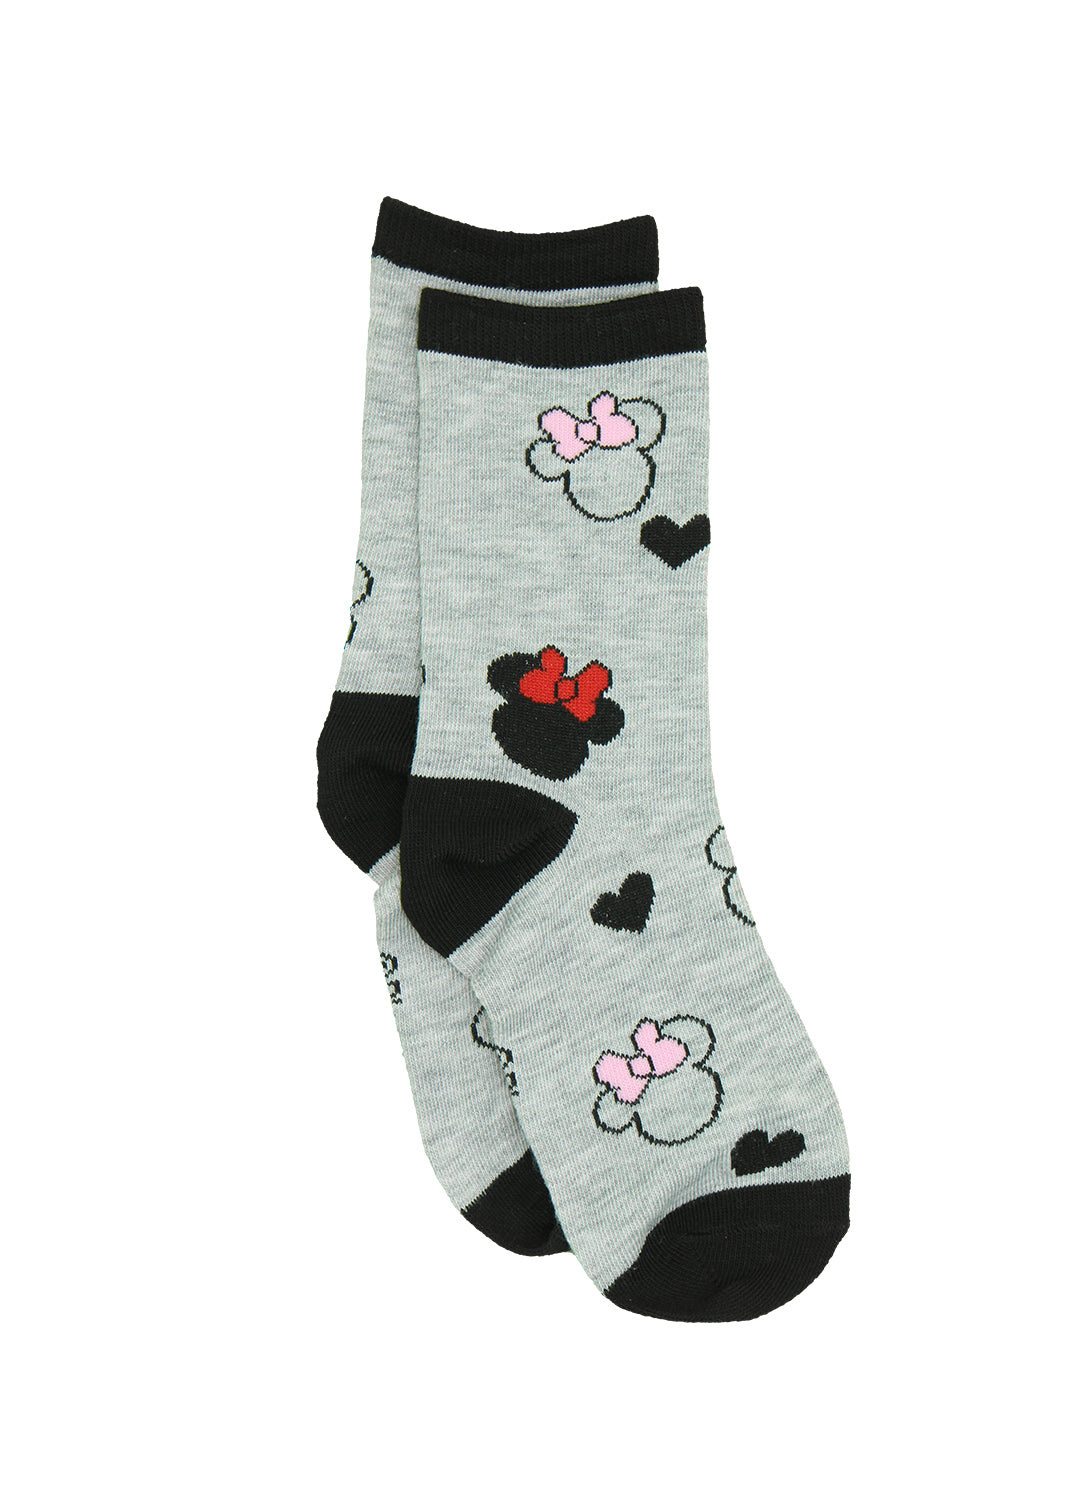 Girls Minnie Mouse Socks - Classic 6 Pack